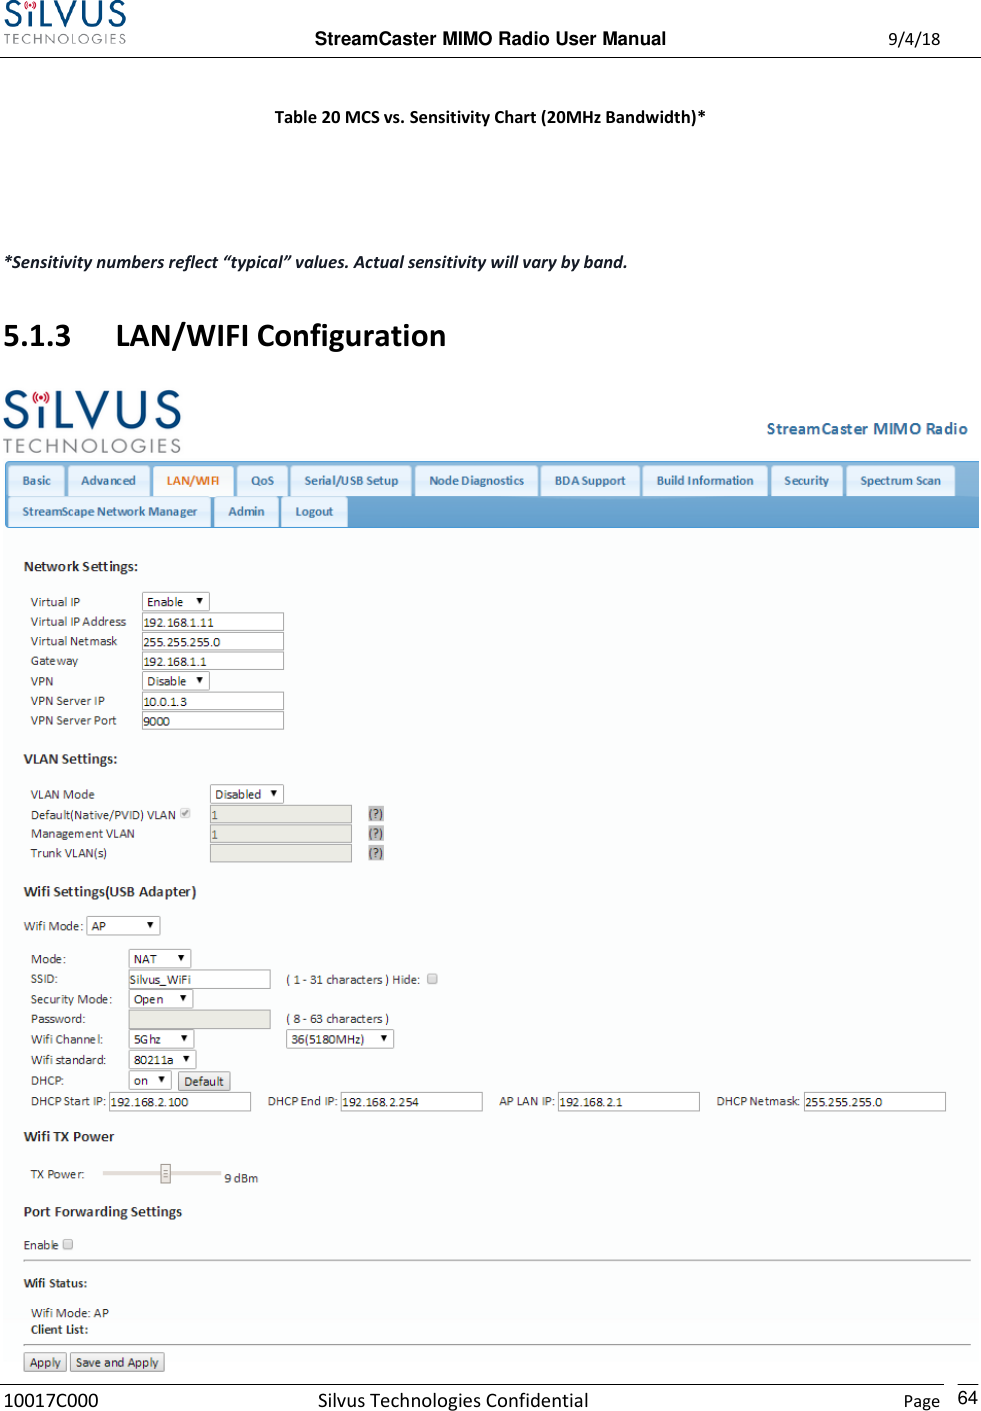  StreamCaster MIMO Radio User Manual  9/4/18 10017C000 Silvus Technologies Confidential    Page    64  Table 20 MCS vs. Sensitivity Chart (20MHz Bandwidth)*   *Sensitivity numbers reflect “typical” values. Actual sensitivity will vary by band. 5.1.3 LAN/WIFI Configuration  